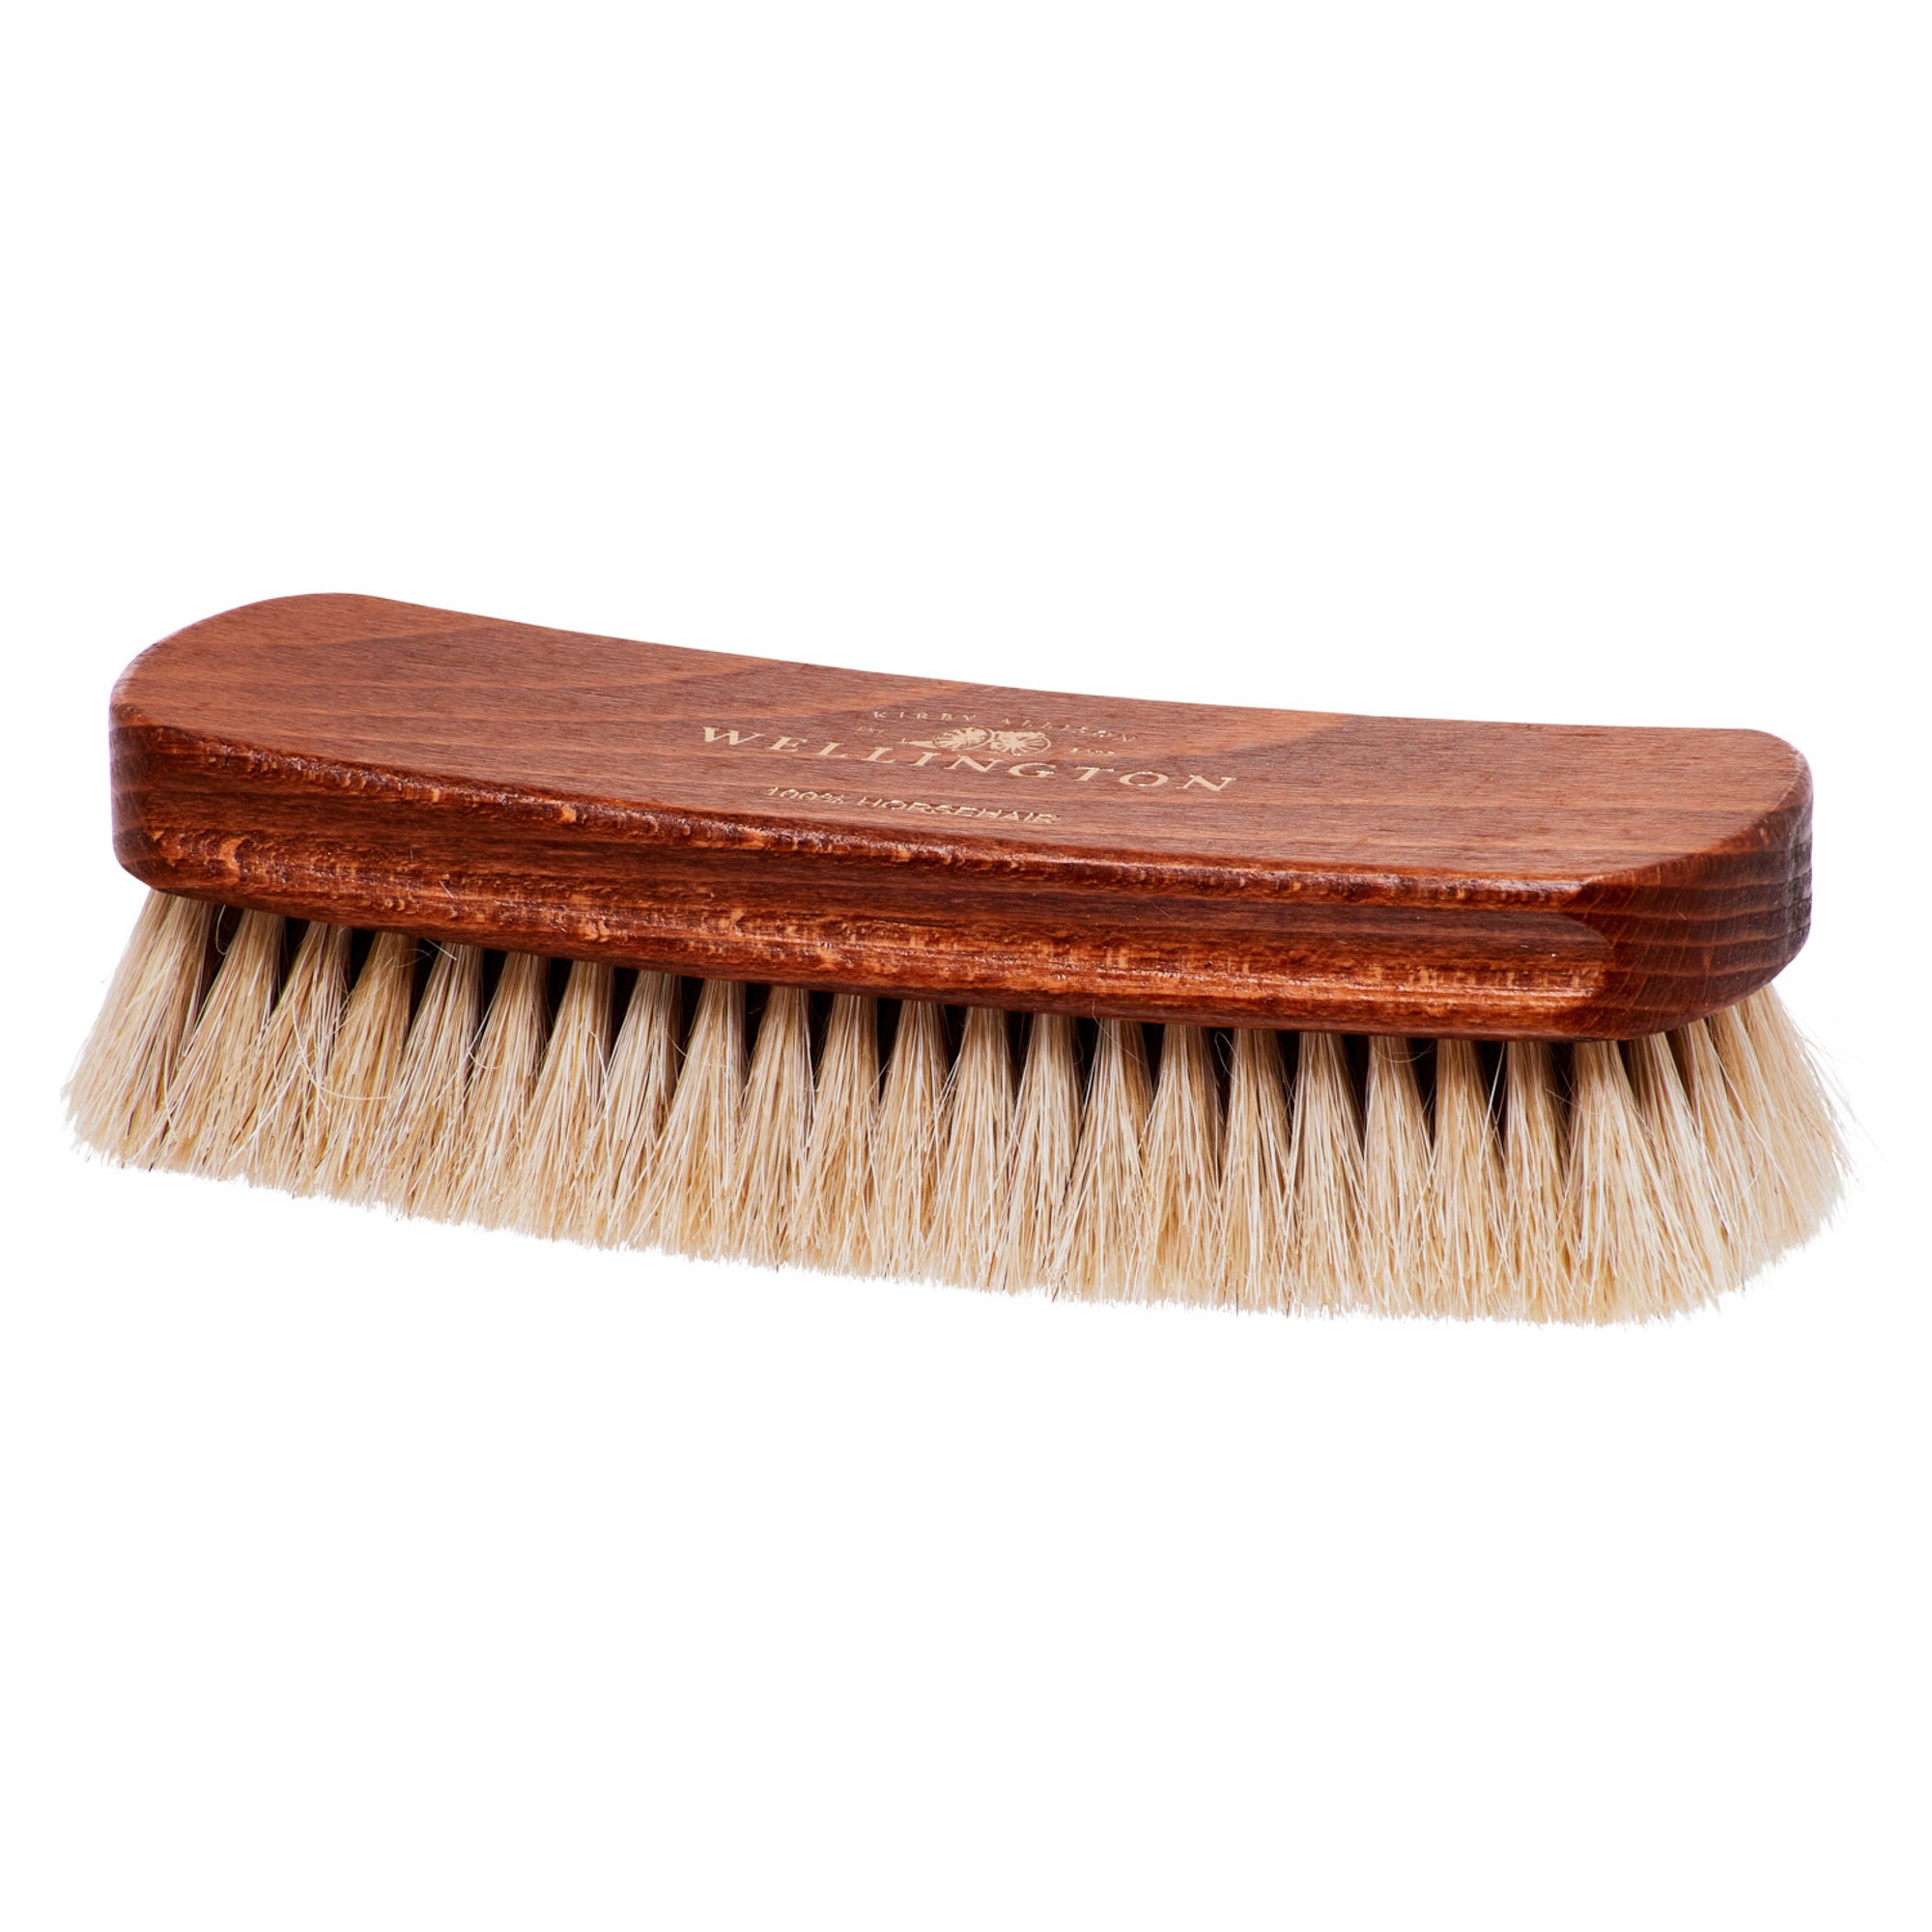 A Medium Wellington Horsehair Shoe Polishing Brush from KirbyAllison.com with horsehair bristles on a white background.